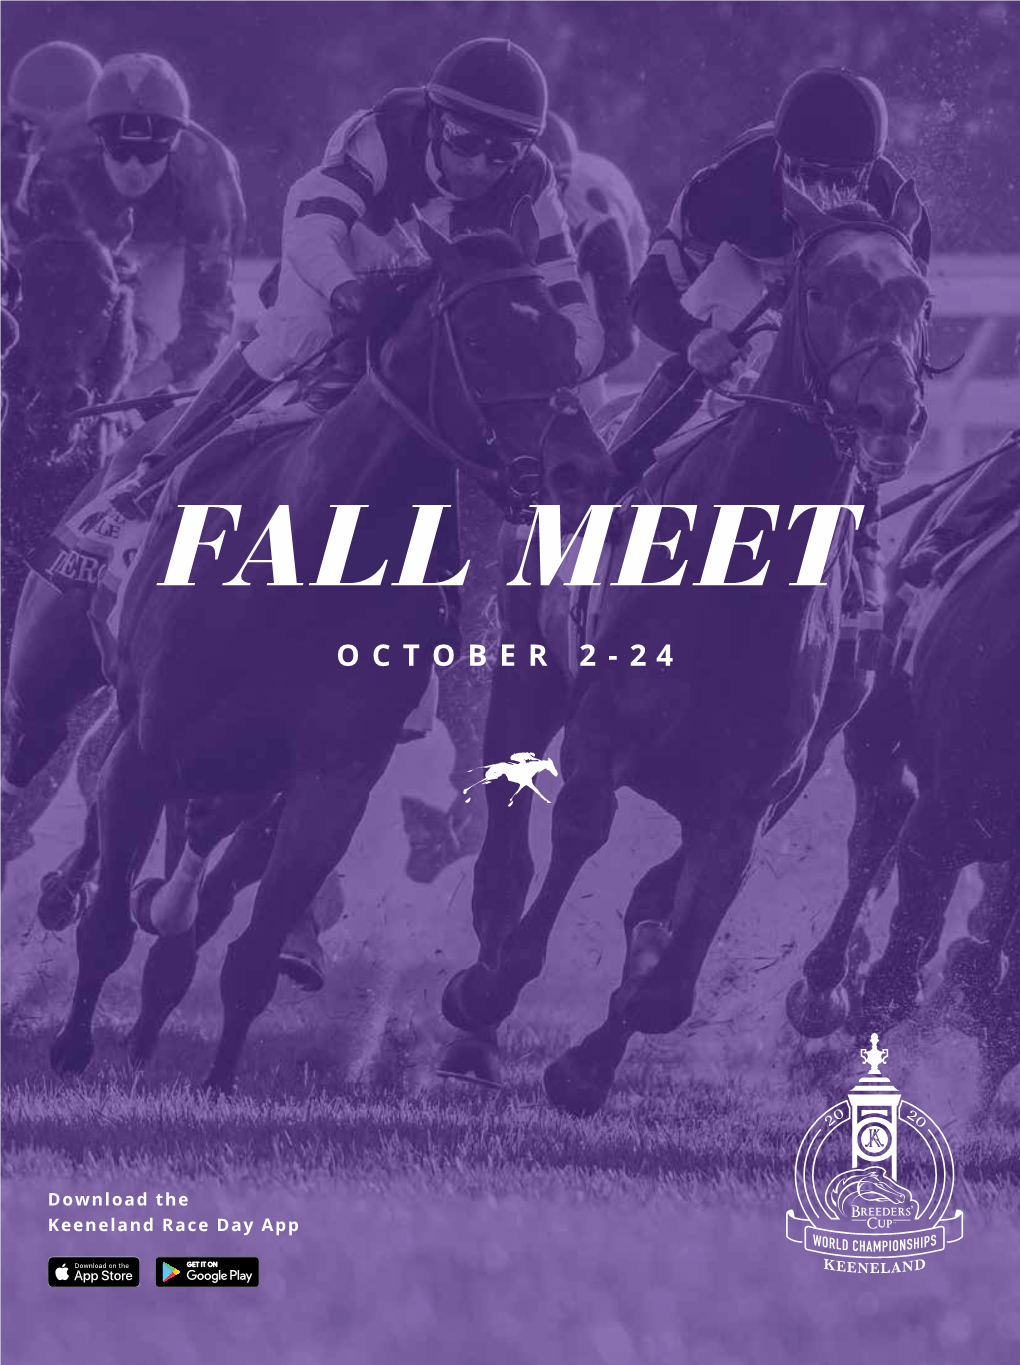 Download the Keeneland Race Day App